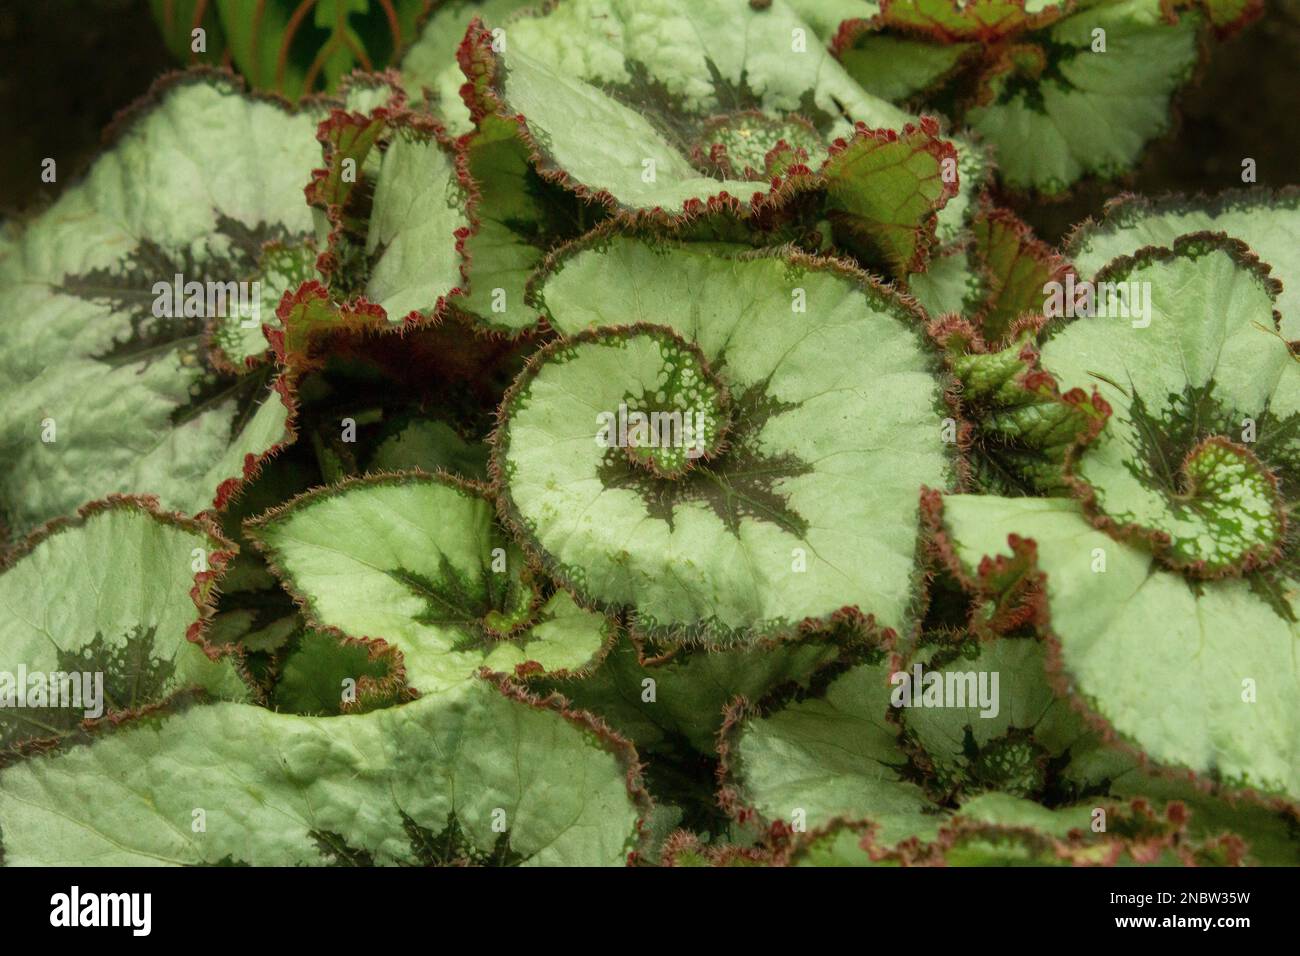 Deciduous green background. Begonia home flower. Plant leaf close-up. Botanical pattern. Nature. Begonia masoniana, also known as the iron cross begonia. Spiral begonias at garden and home Stock Photo